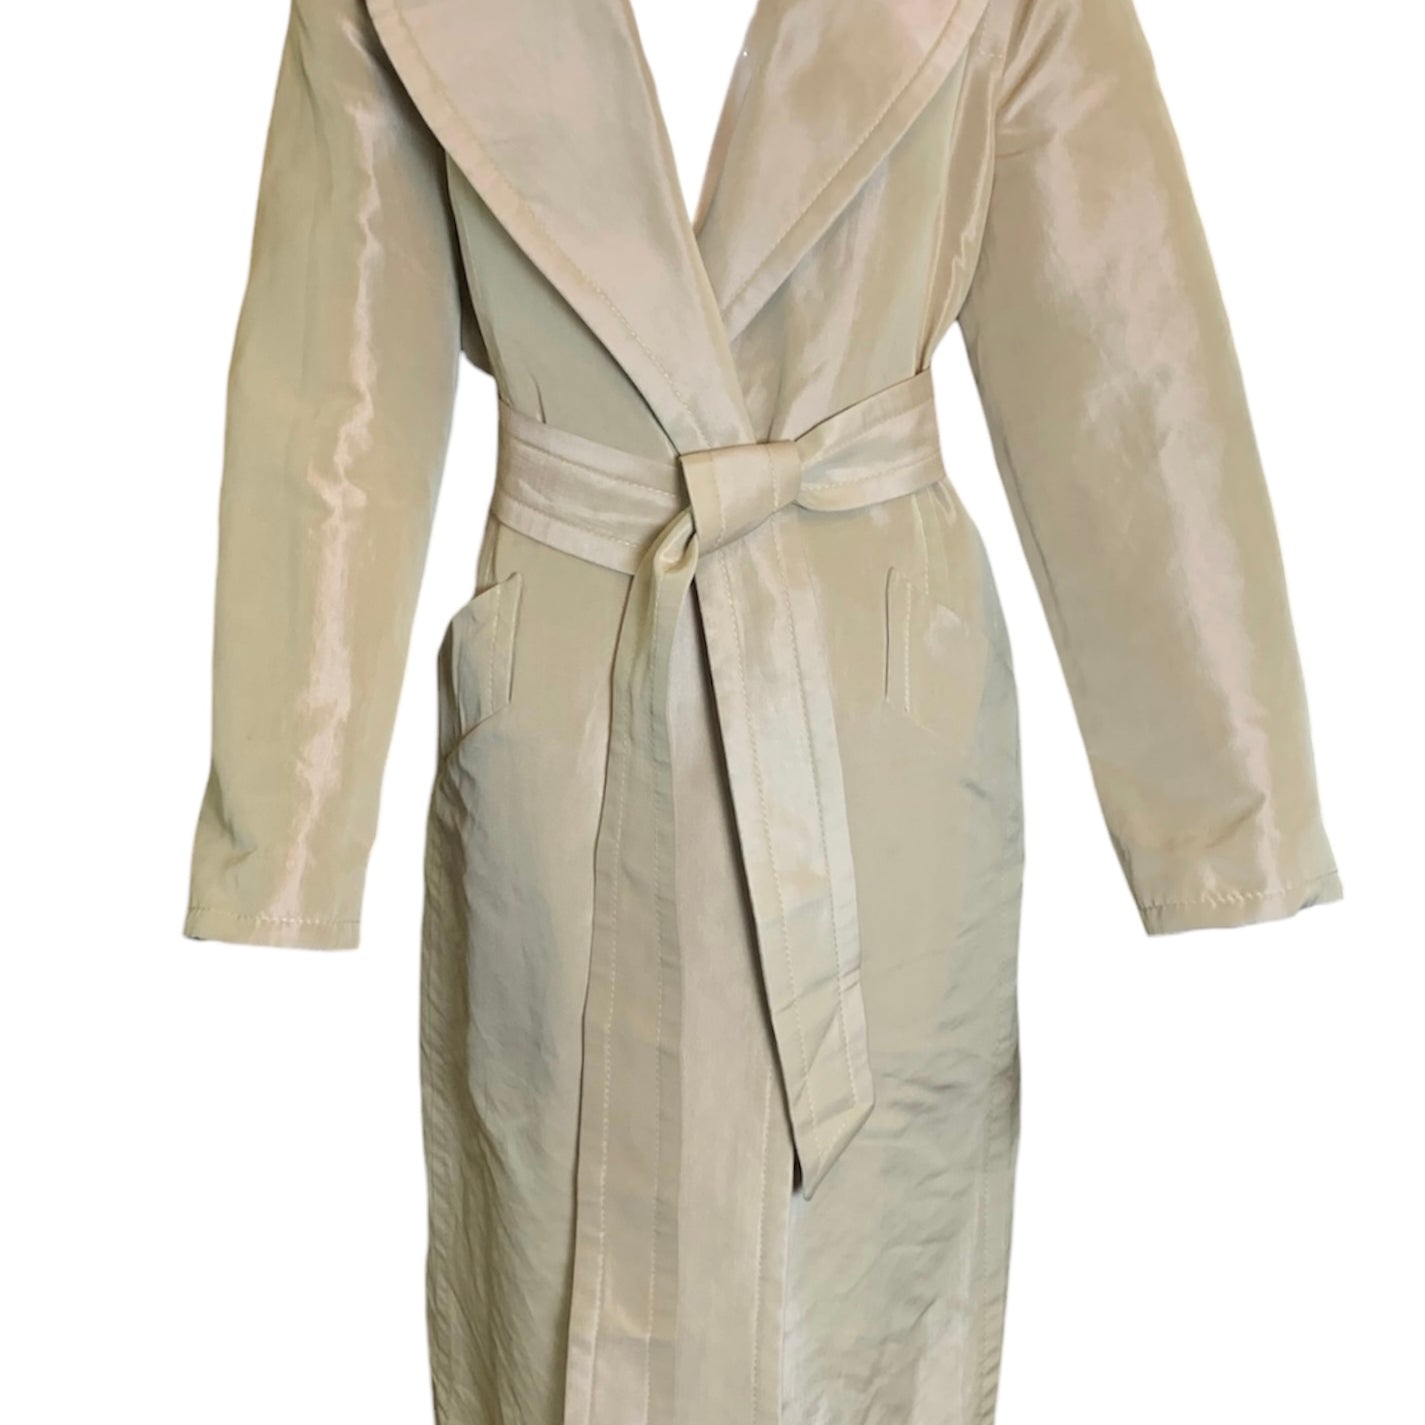 Gianfranco Ferre 1990s Sand Colored  Wrap Trench Coat FRONT 1 of 6